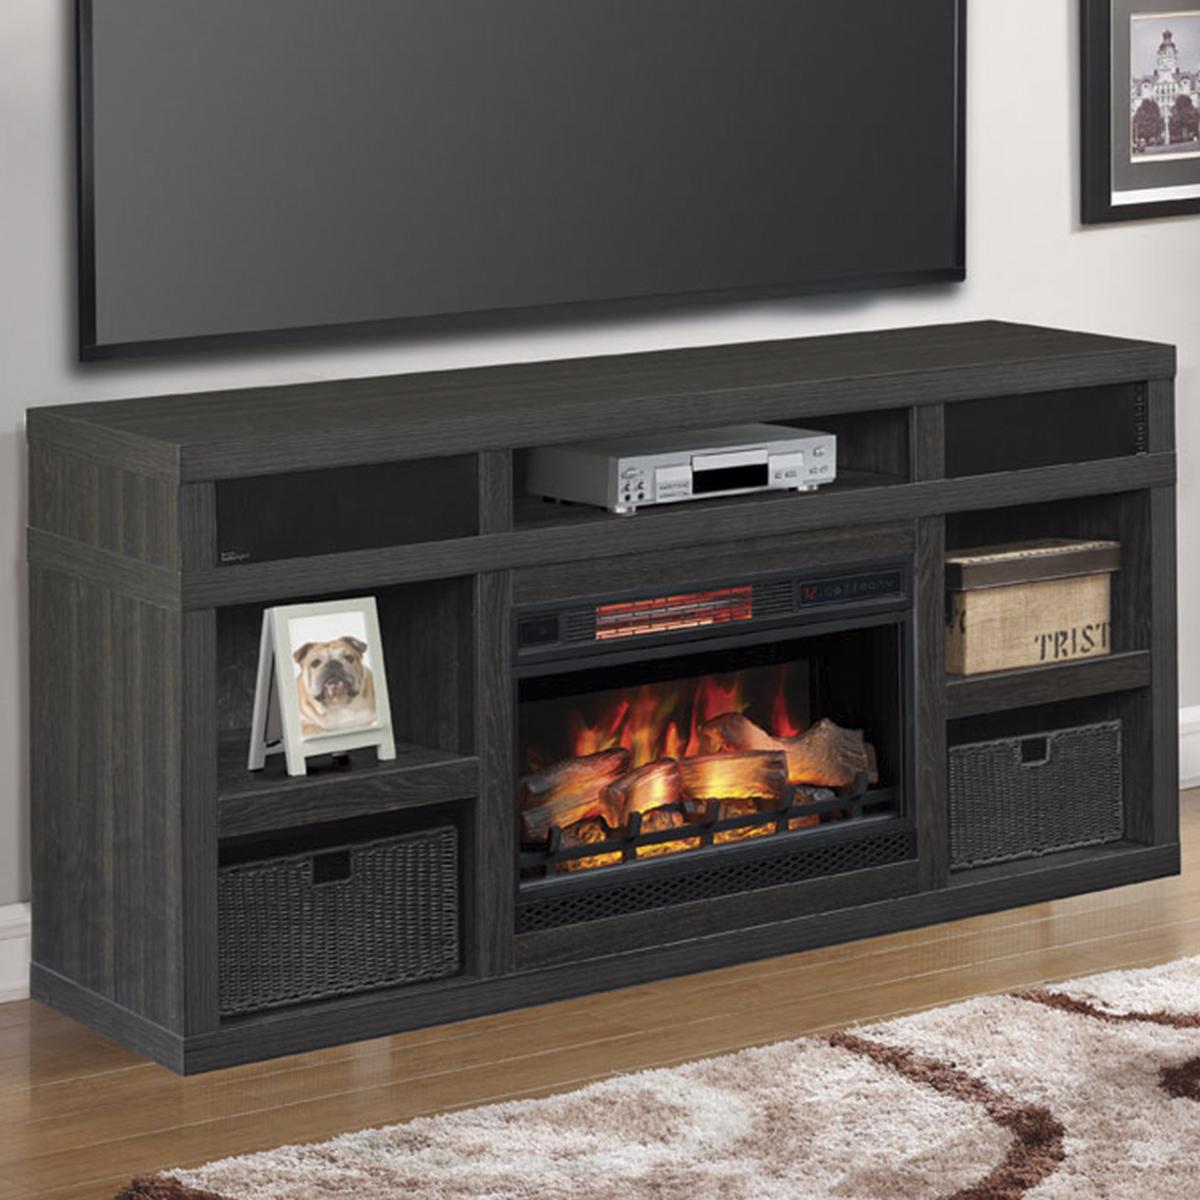 Infrared Electric Fireplace Tv Stand New Fabio Flames Greatlin 64" Tv Stand In Black Walnut